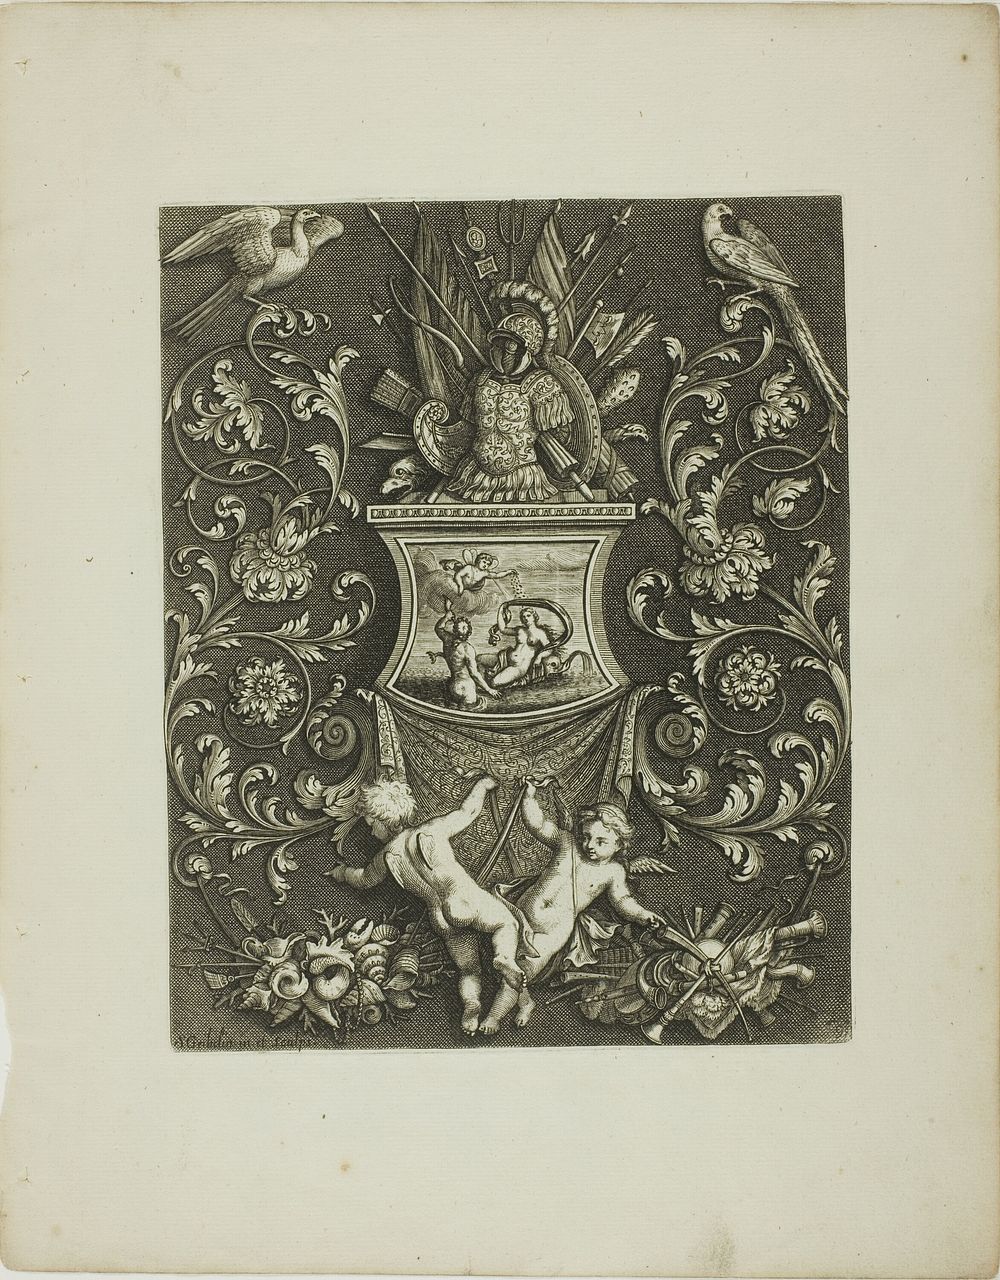 Plate Nine, from A New Book of Ornaments by Simon Gribelin, II